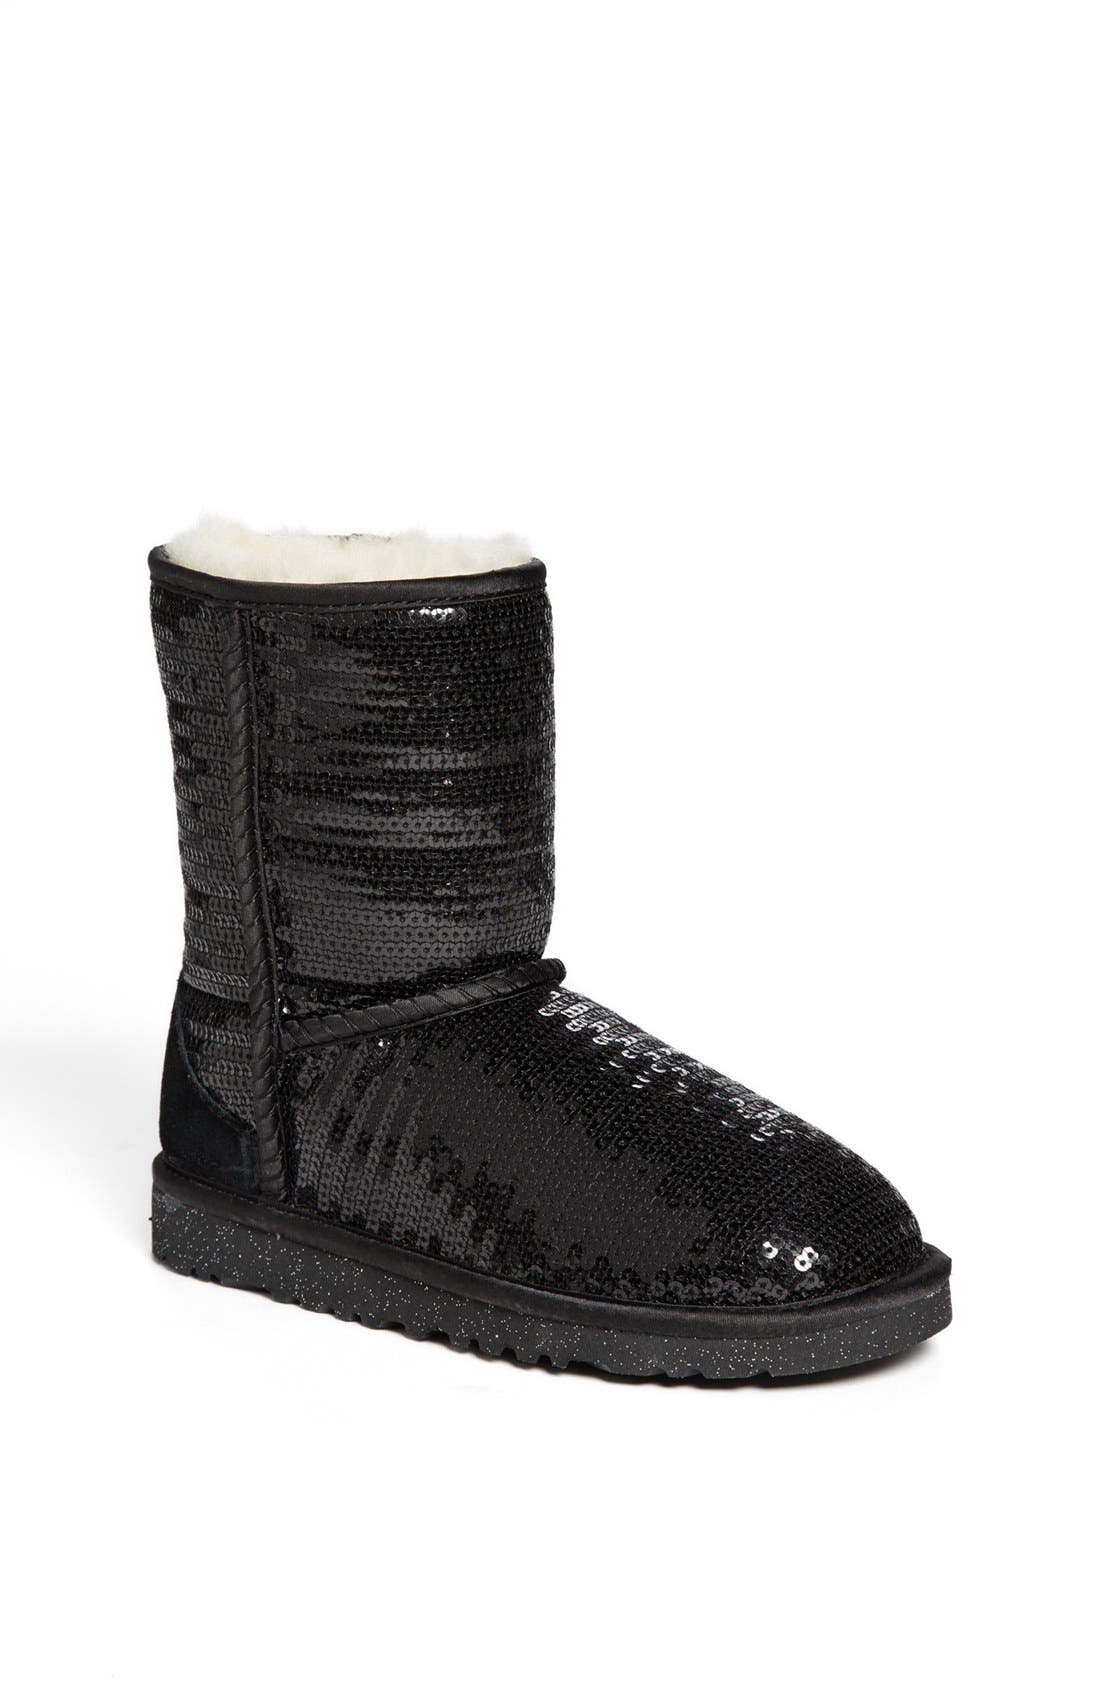 ugg classic short sparkle boots